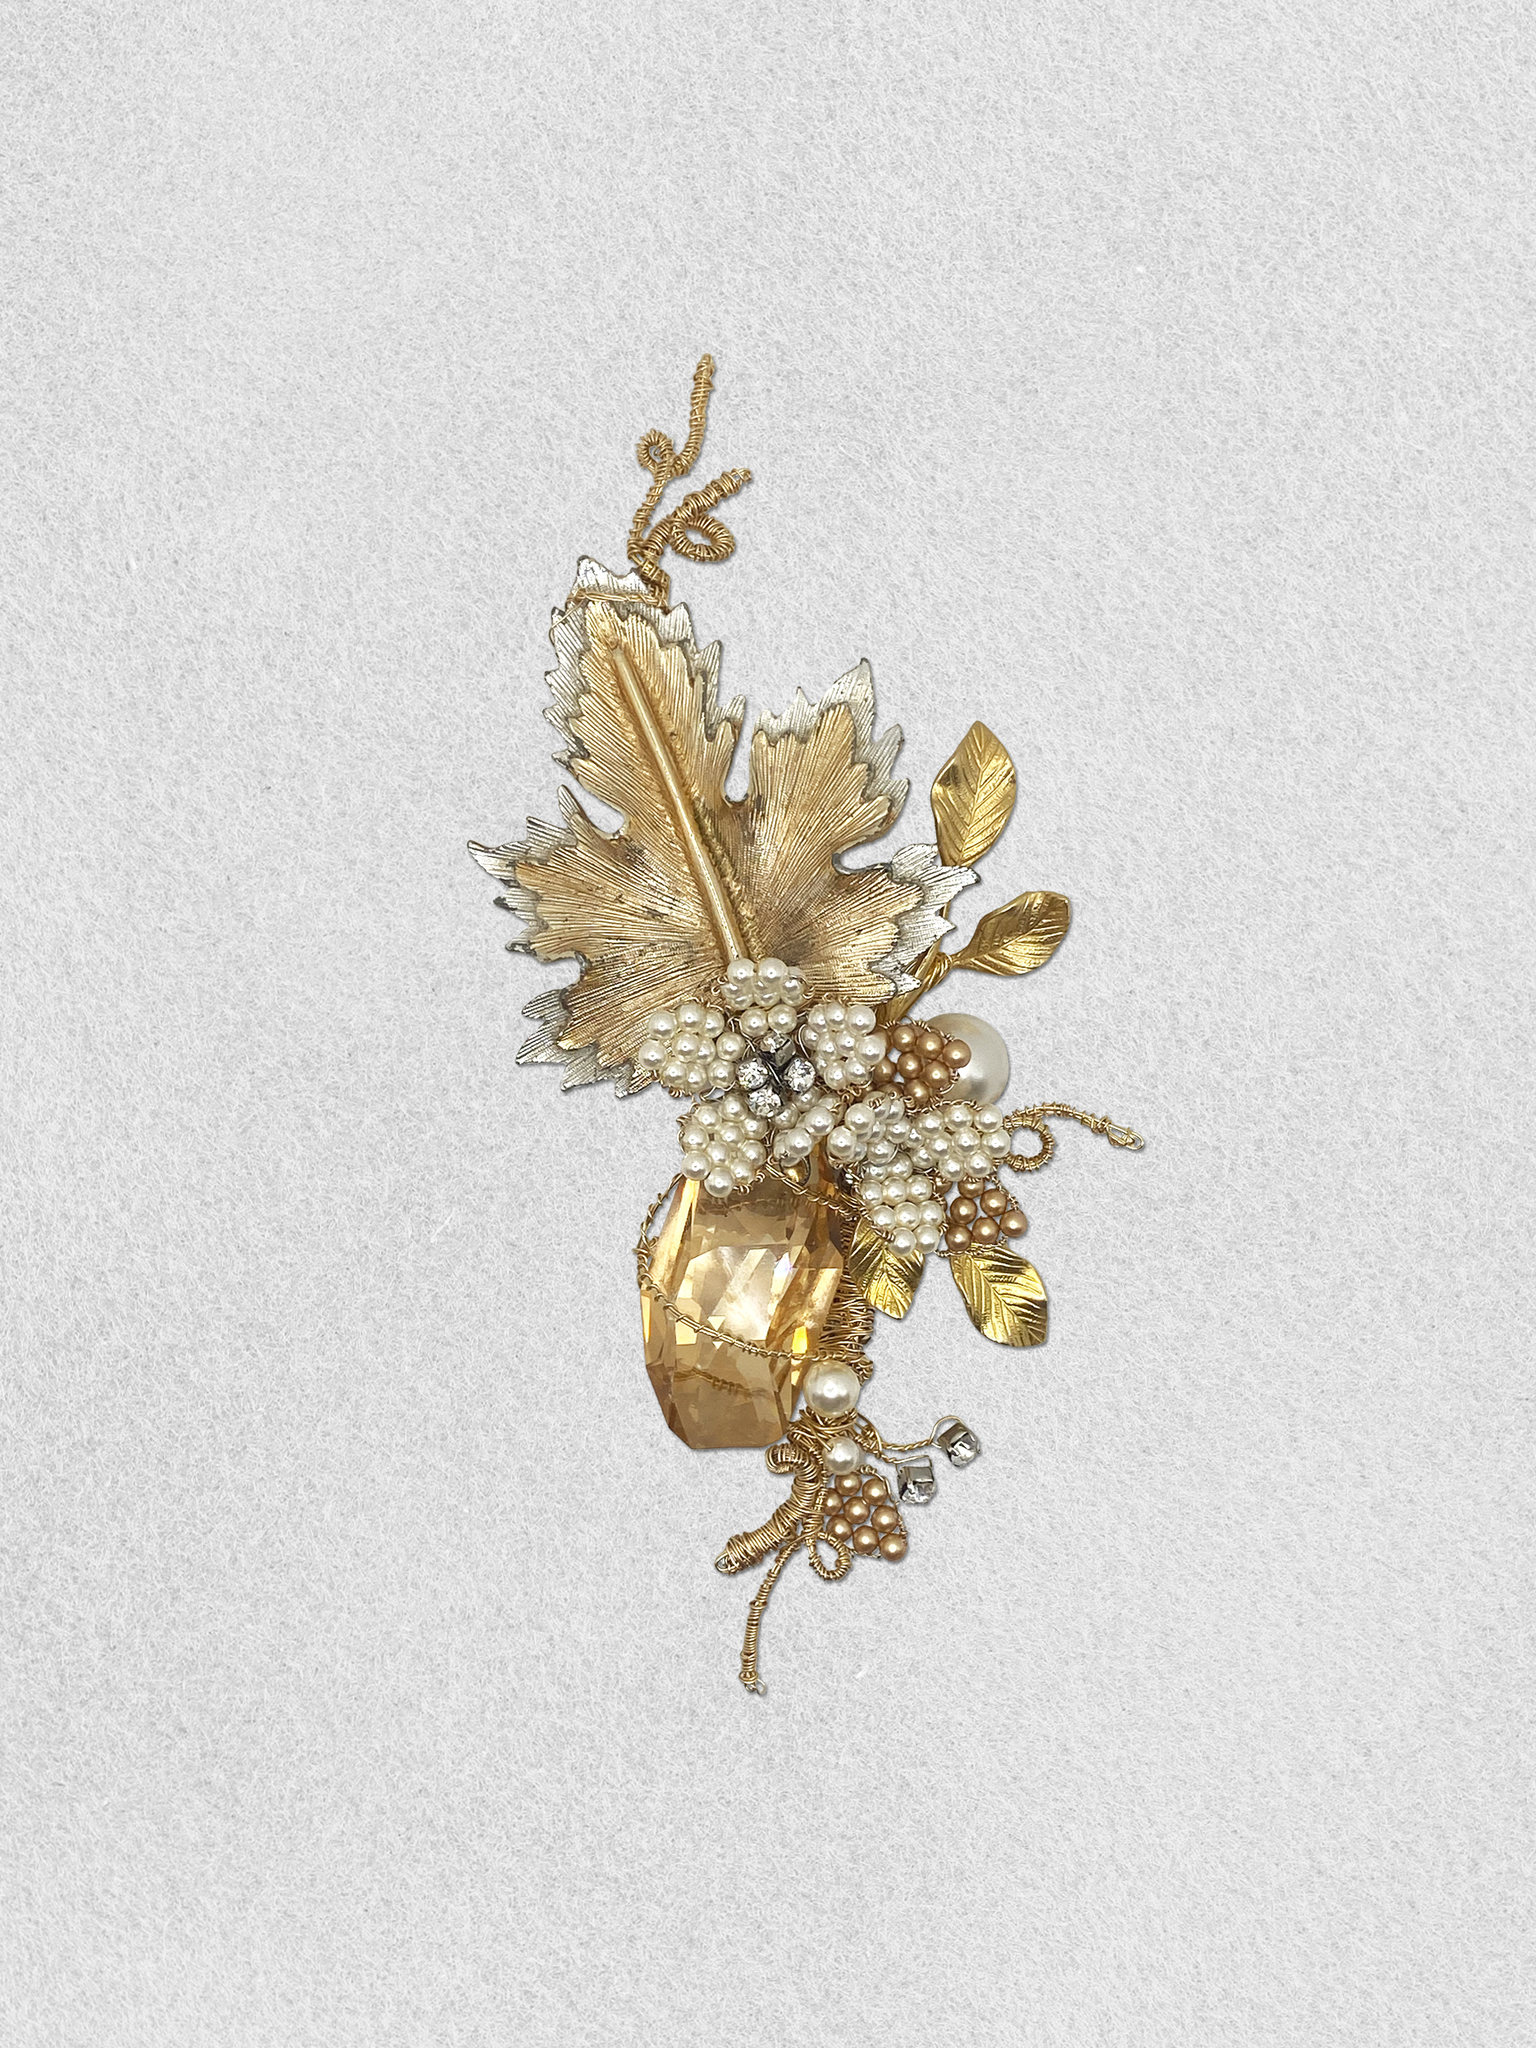 Men's Lapel Pin - Maple and Pearlescent Blooms